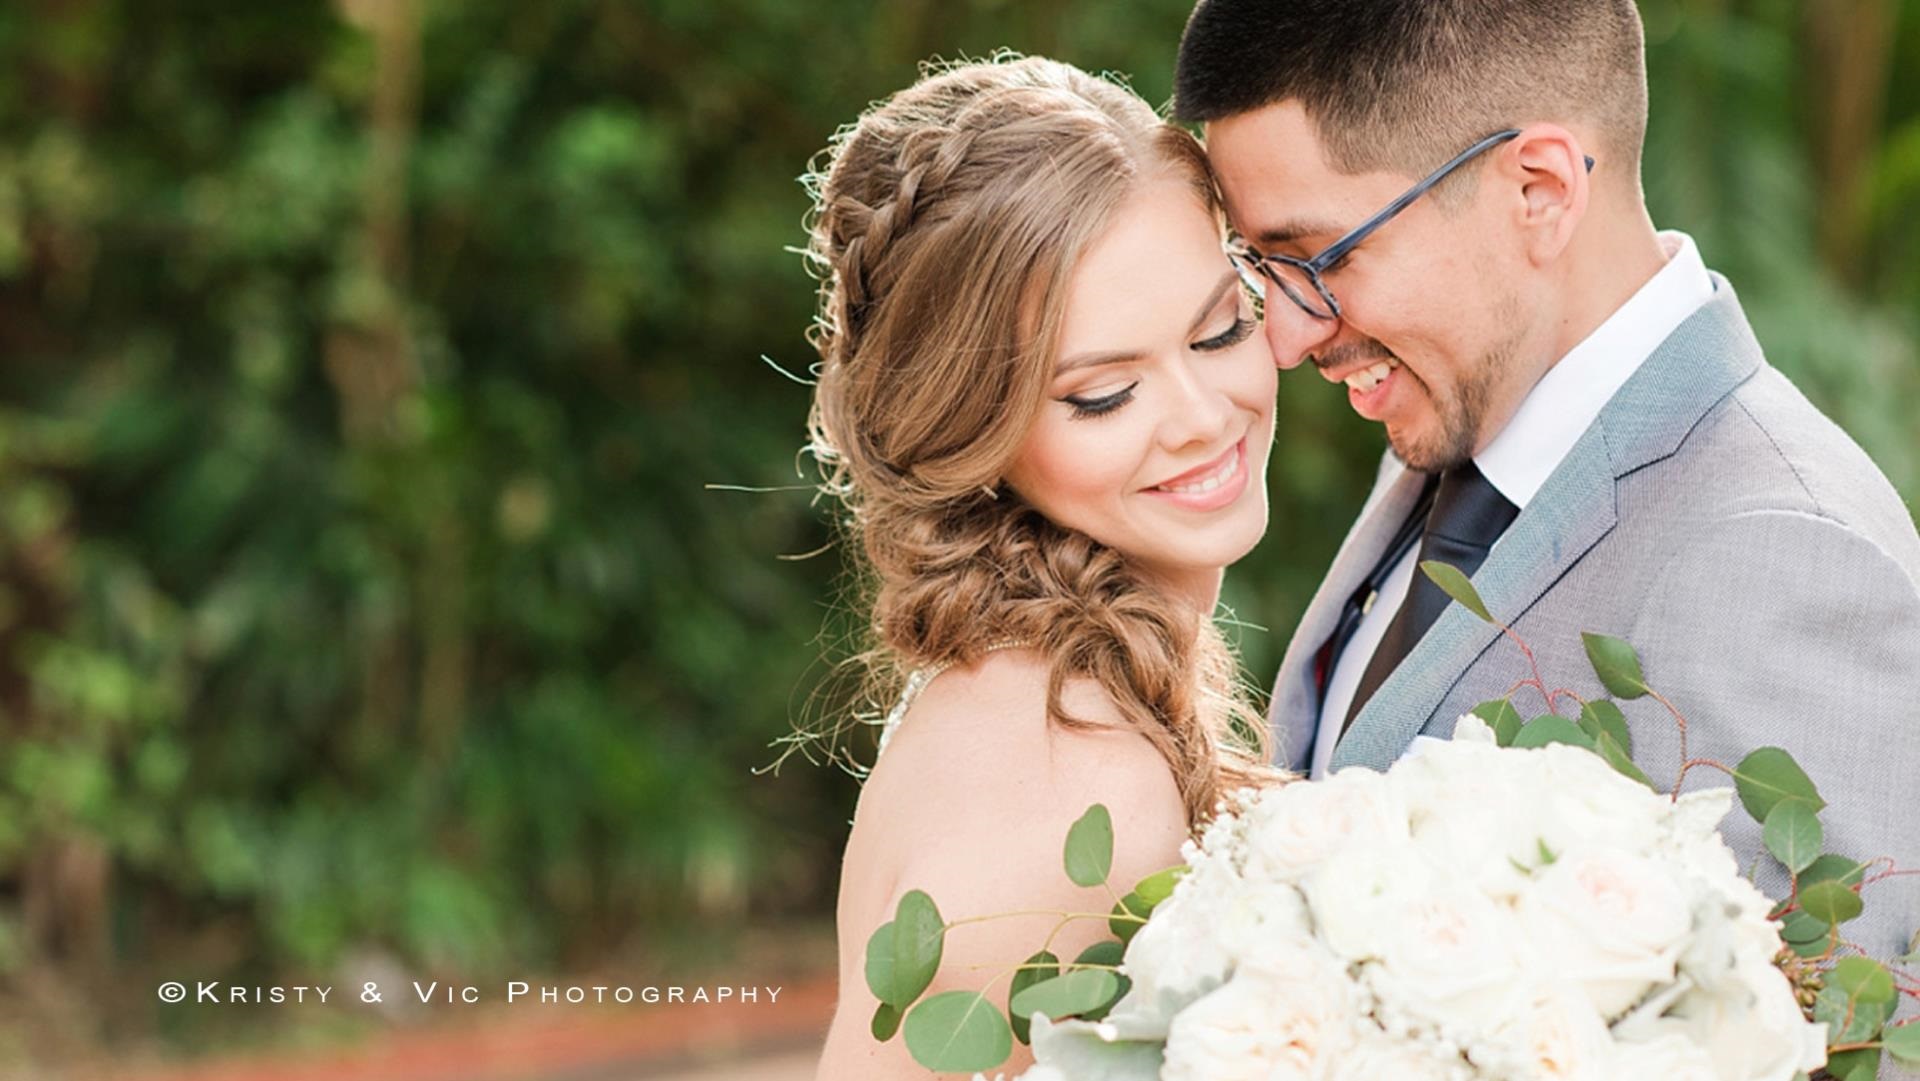 Wedding photo session by Kristy & Vic Photography